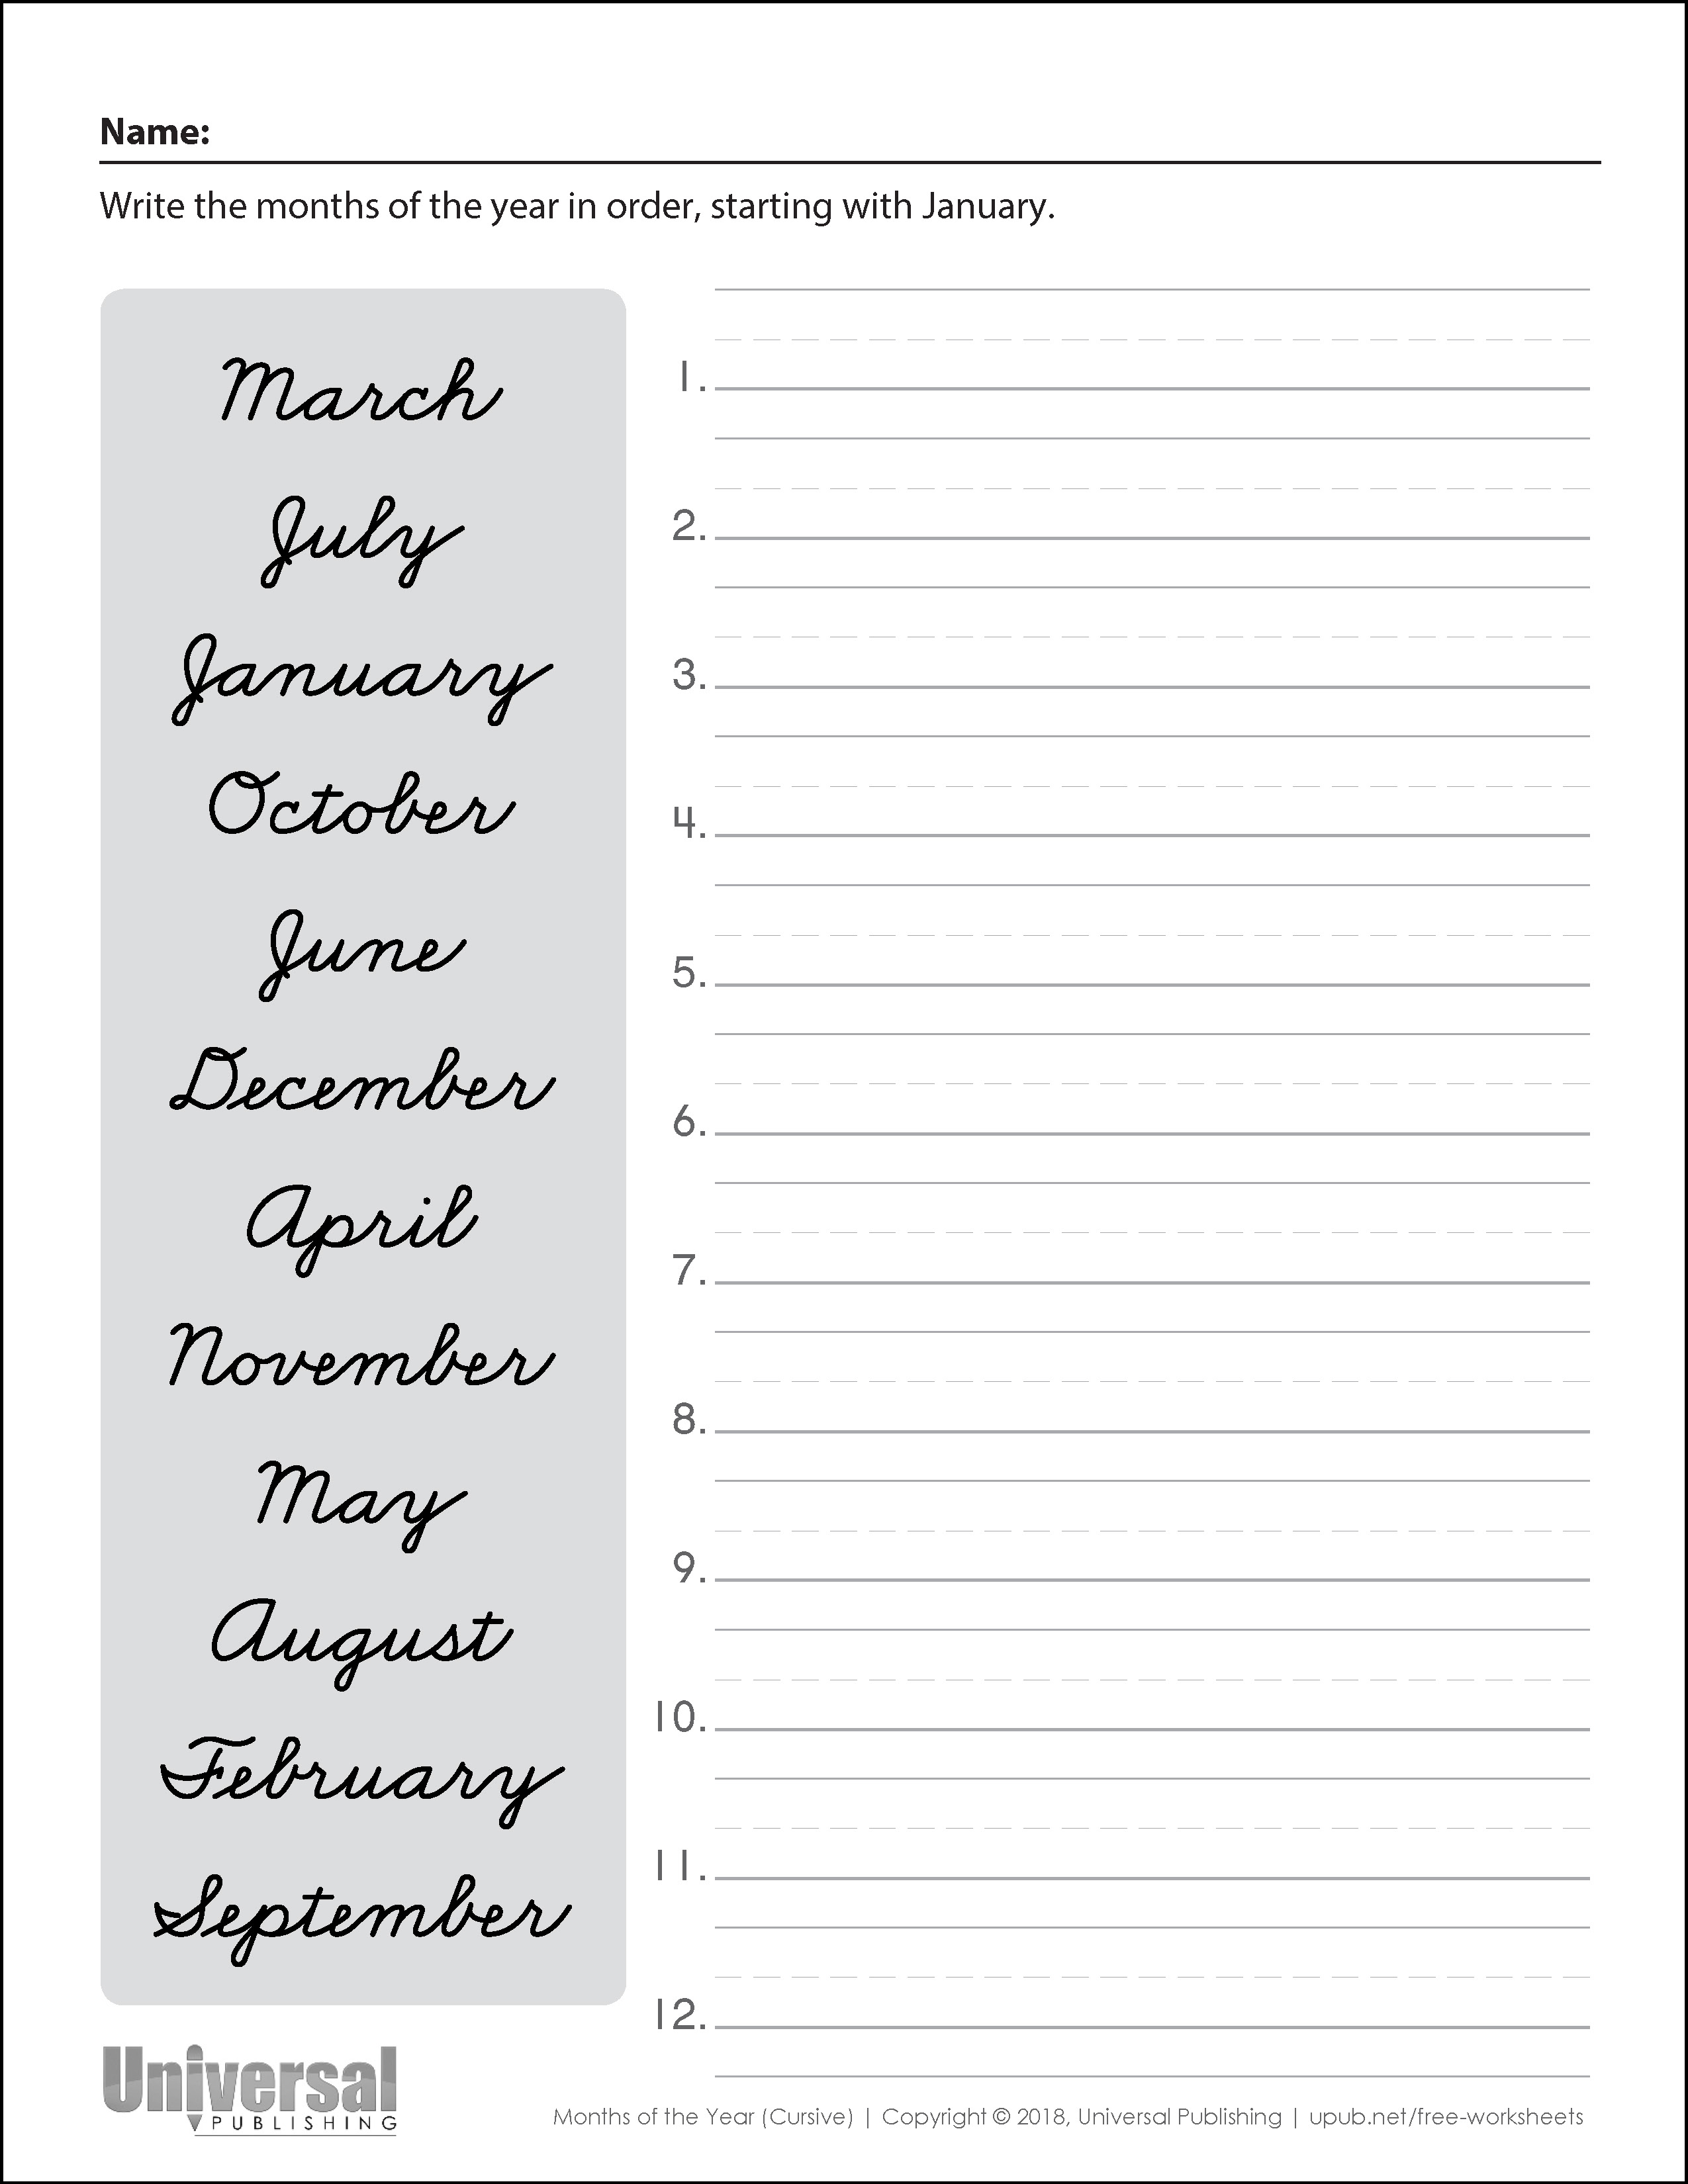 Months of the Year Cursive